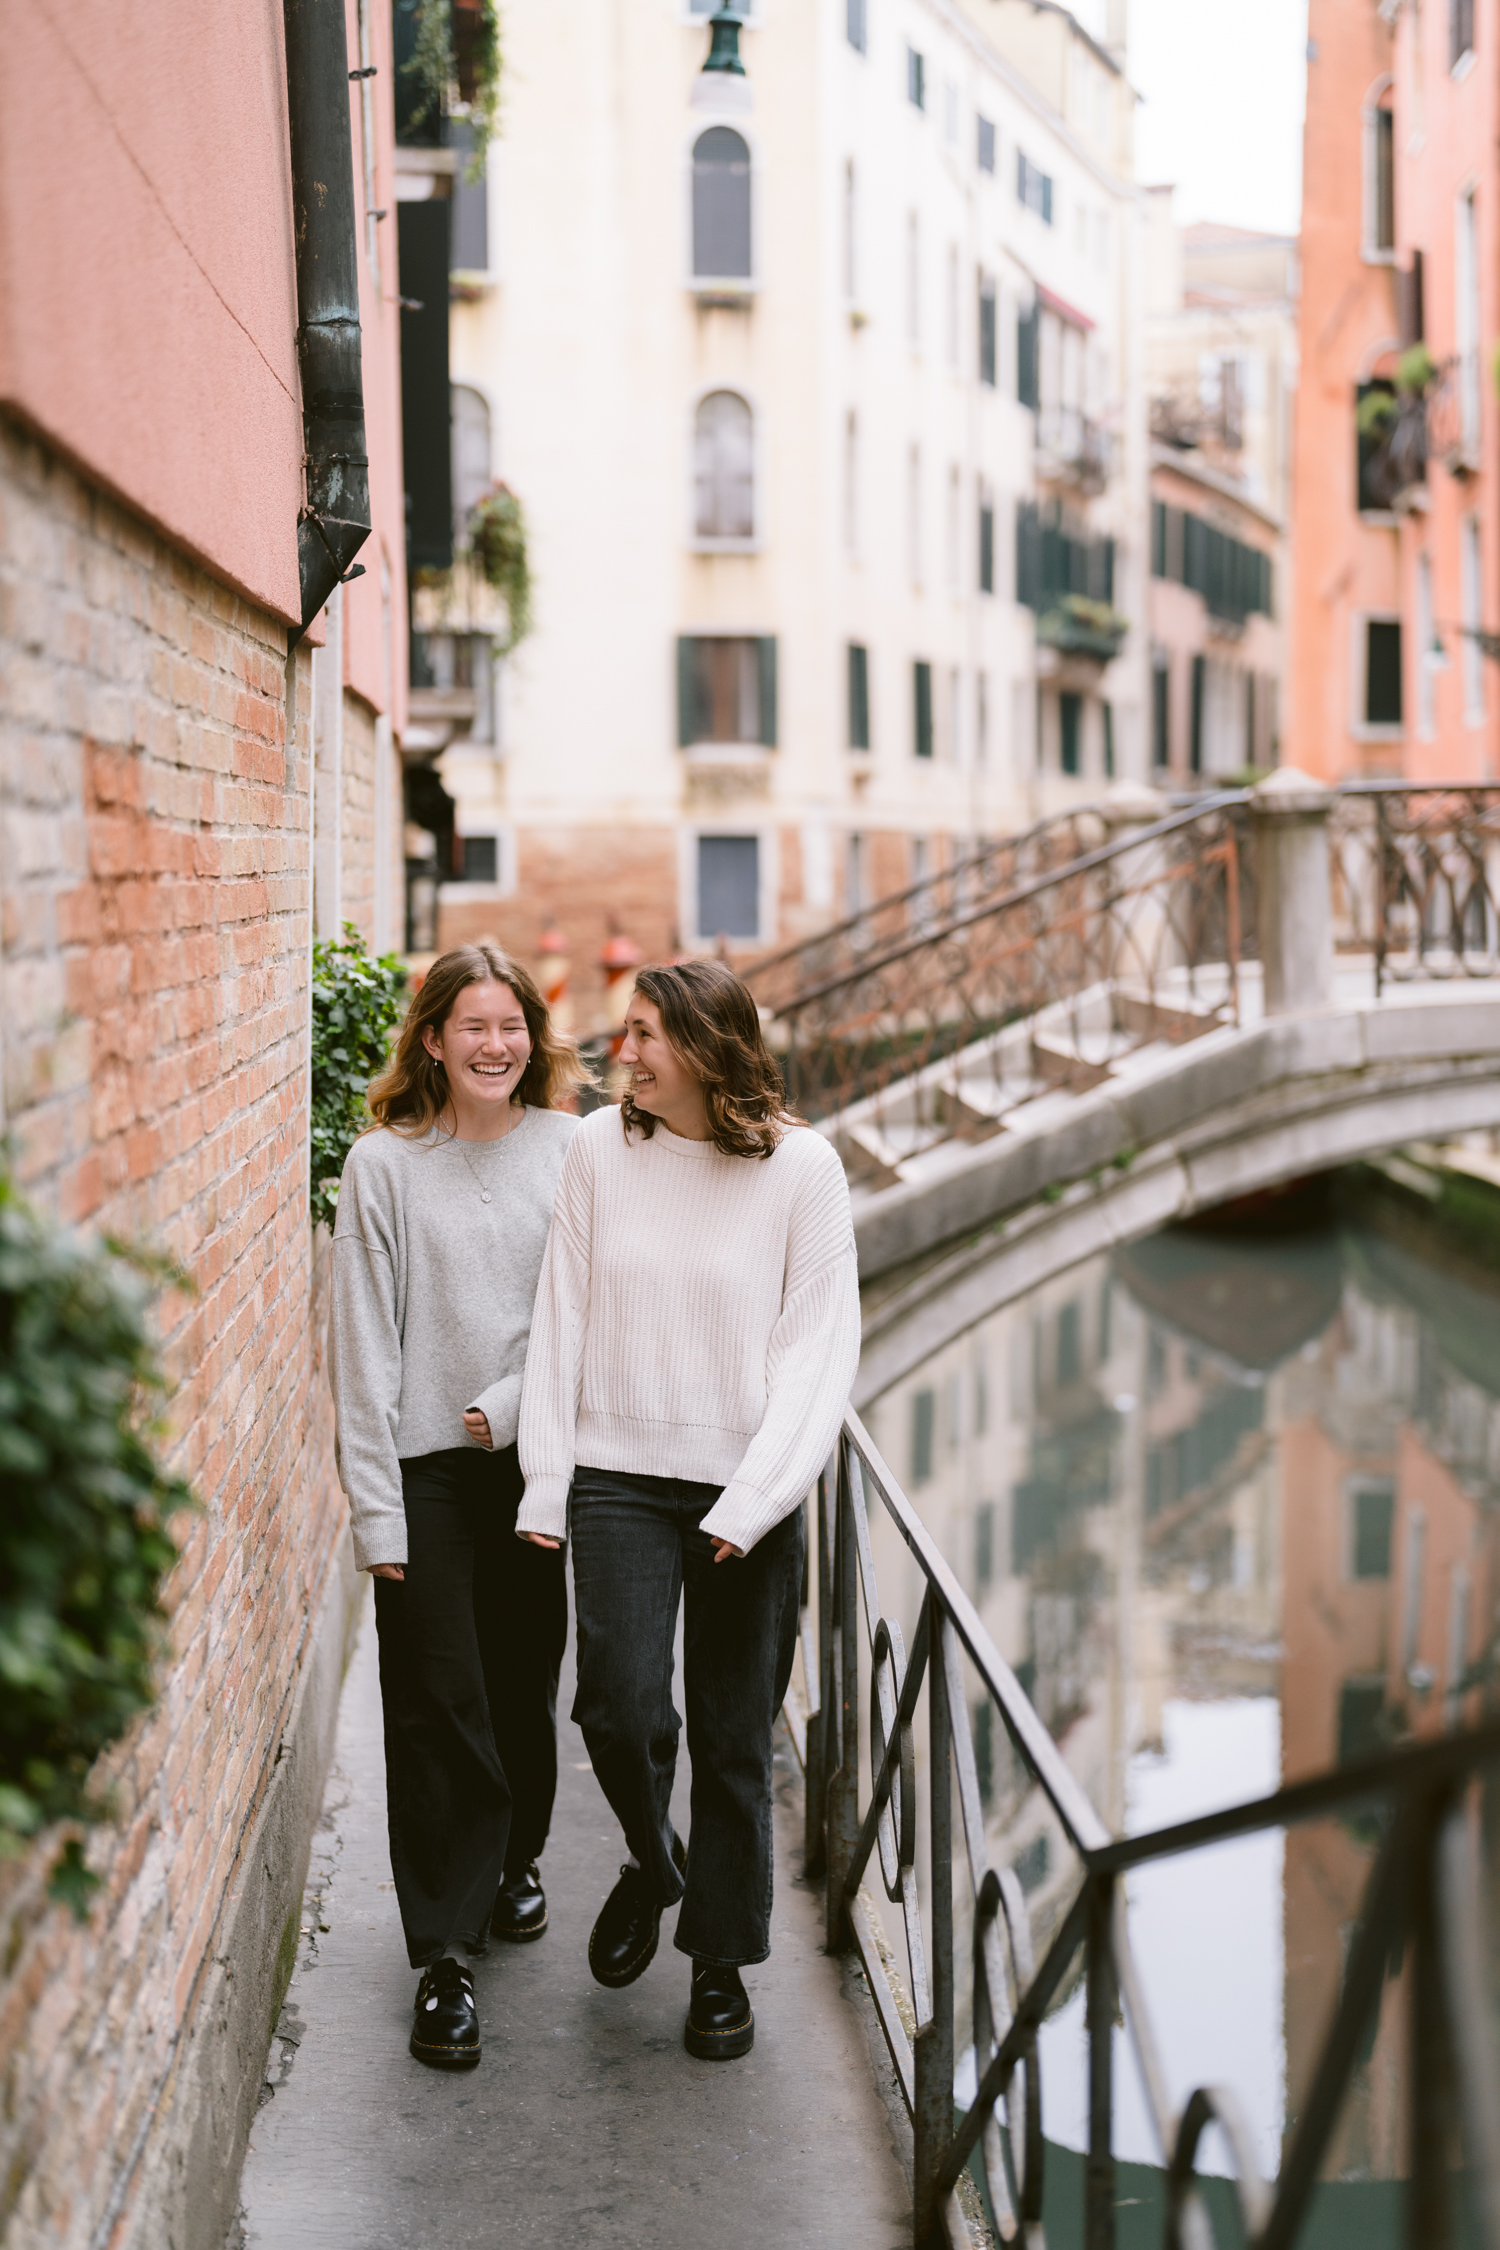 Book the best Venice photographer for your vacation family photos